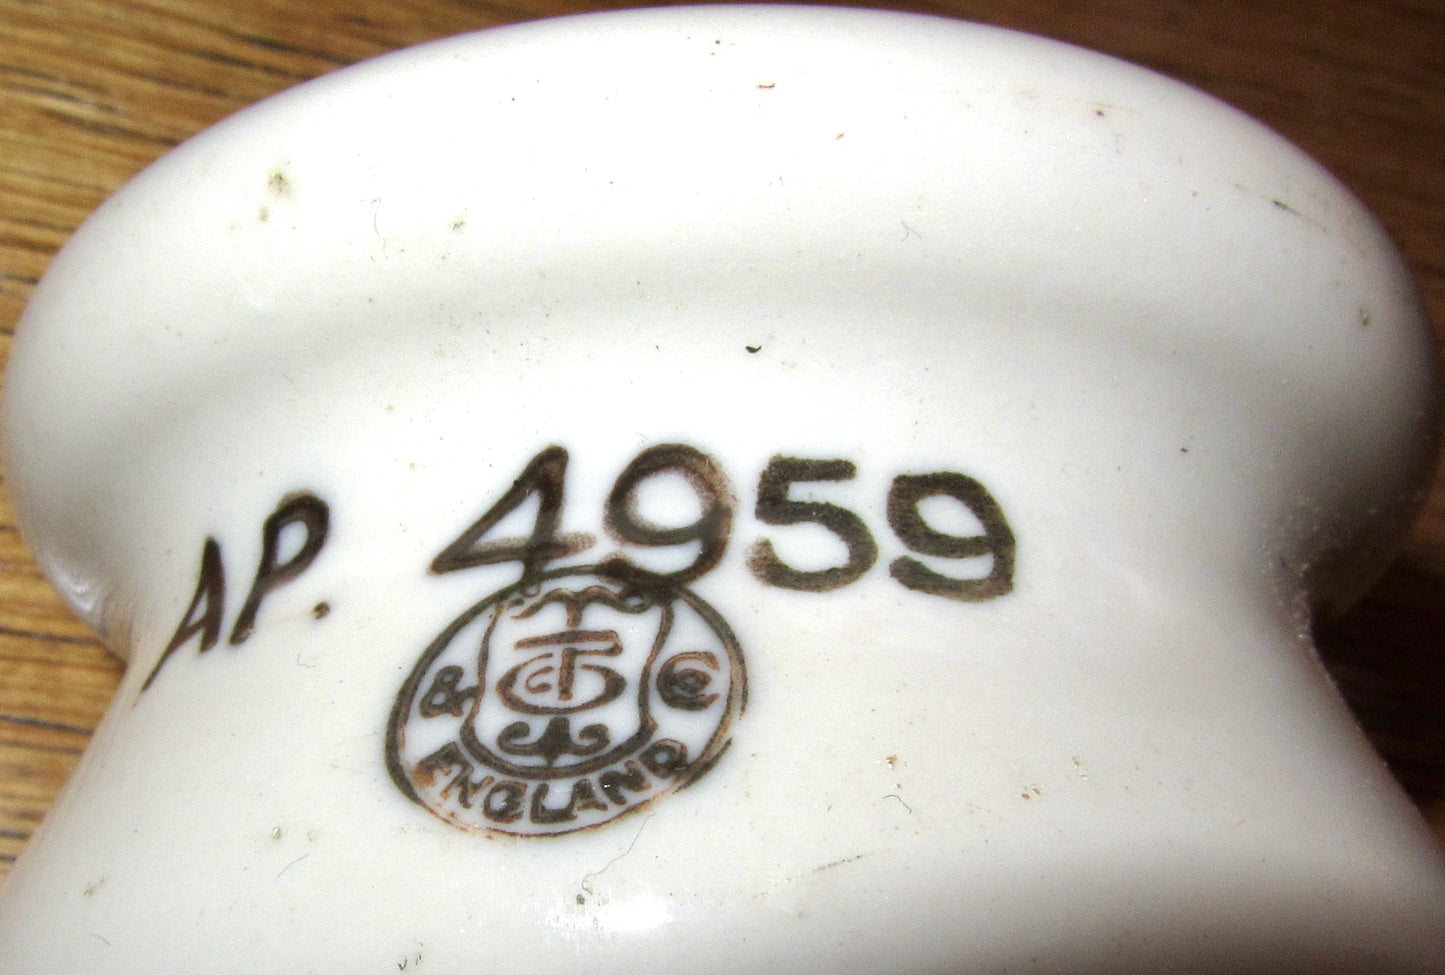 Admiralty Pattern 4959 White Porcelain Electrical Insulator Made by Taylor Tunnicliff & Co